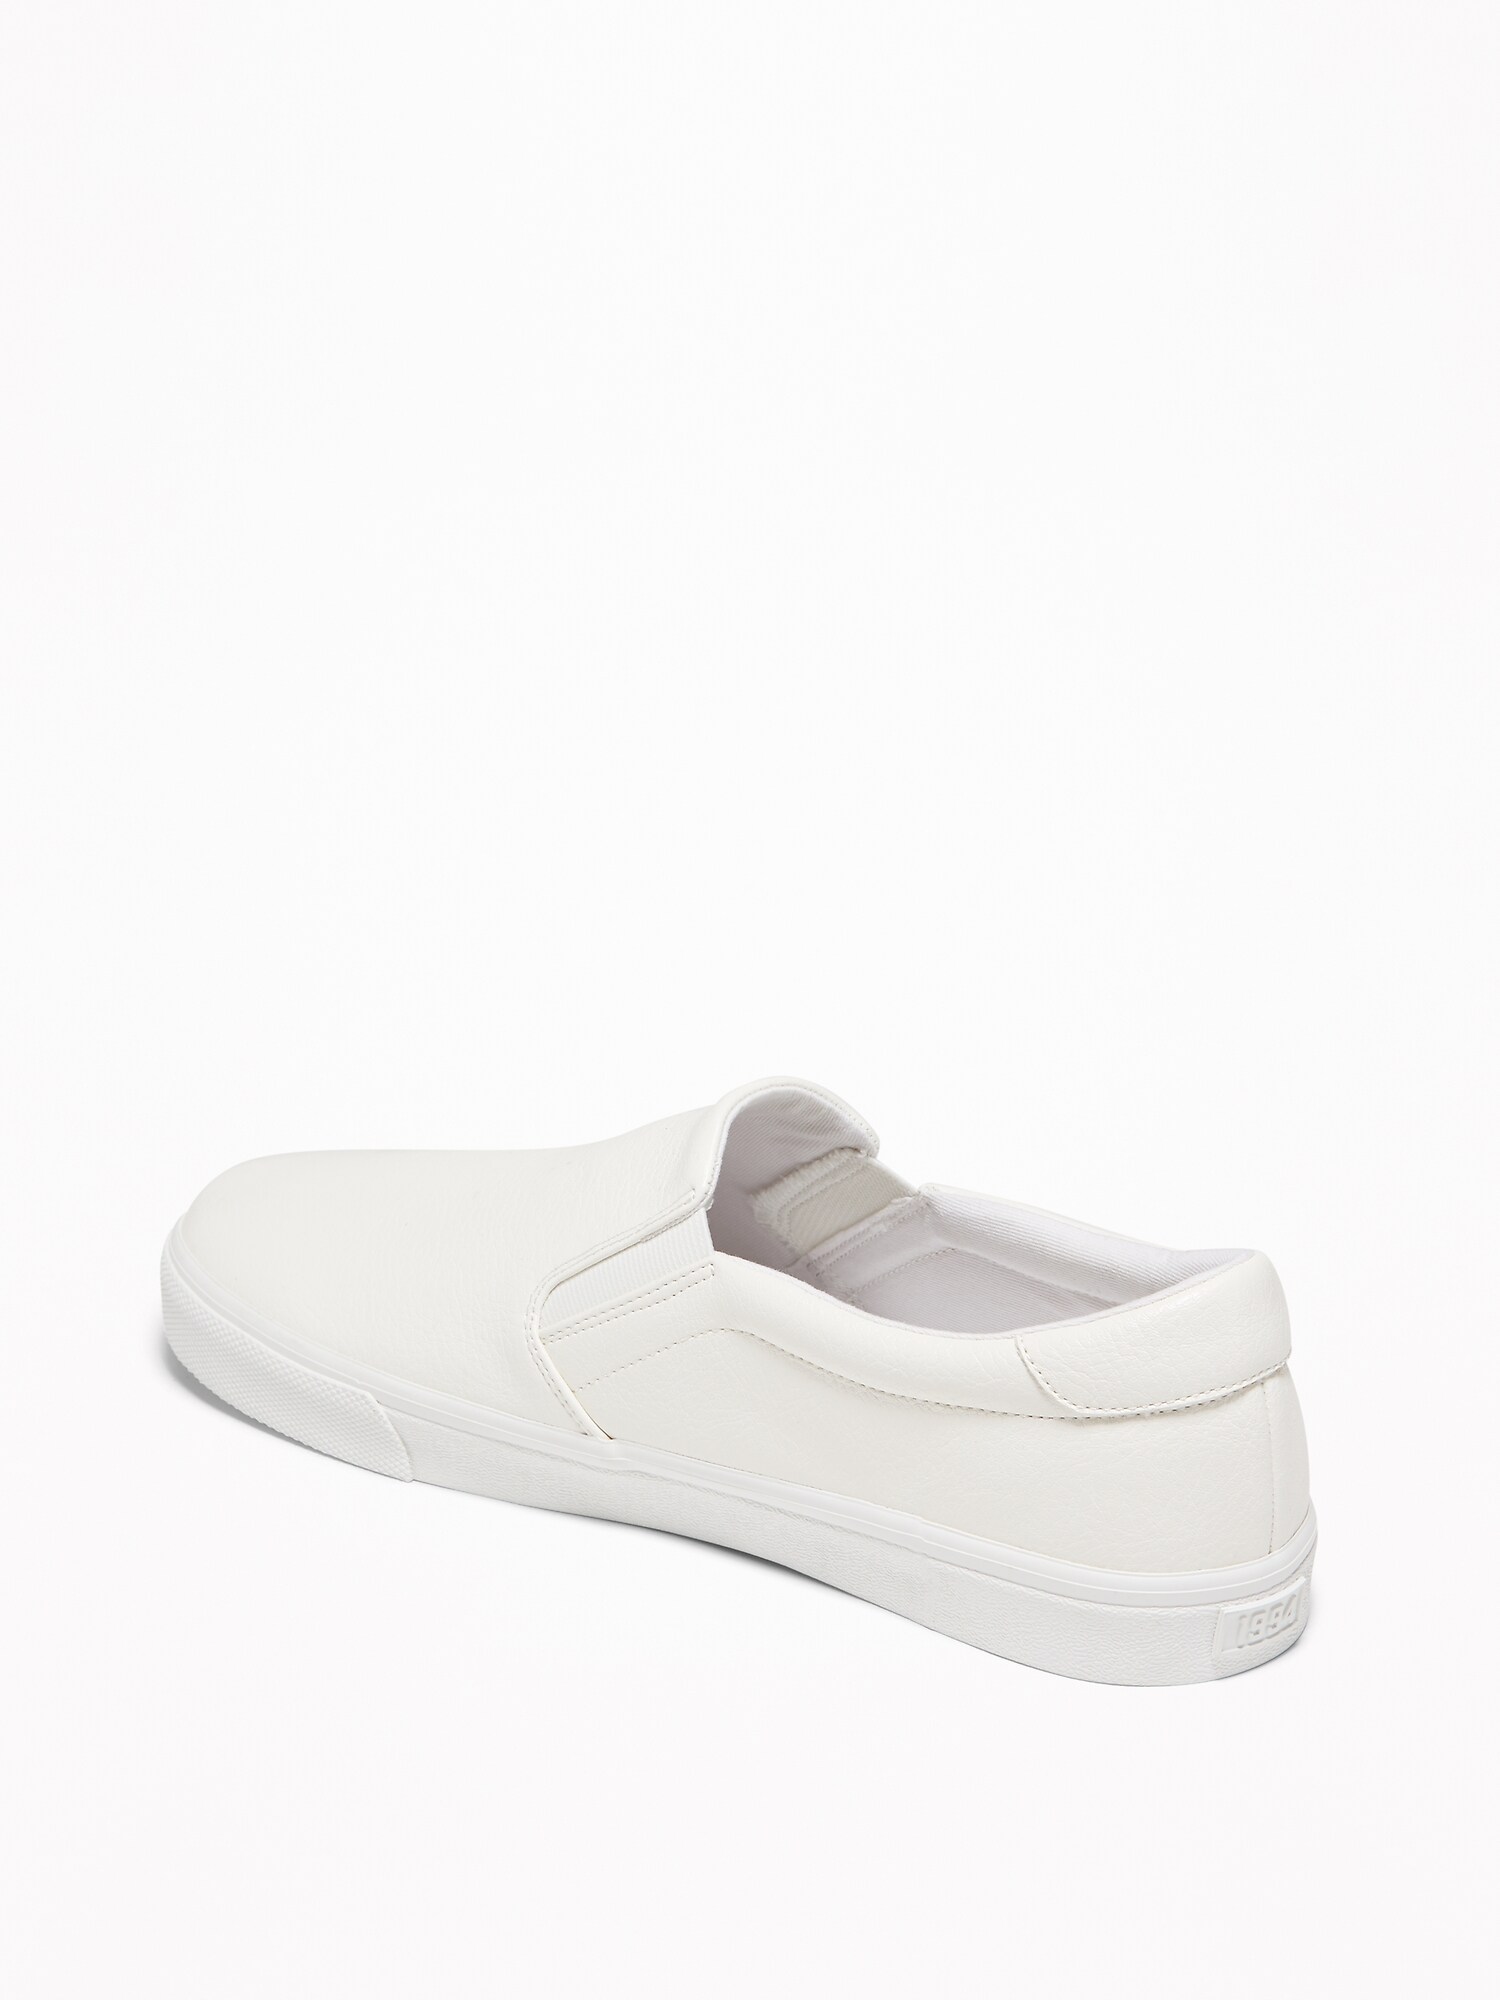 old navy slip on shoes mens